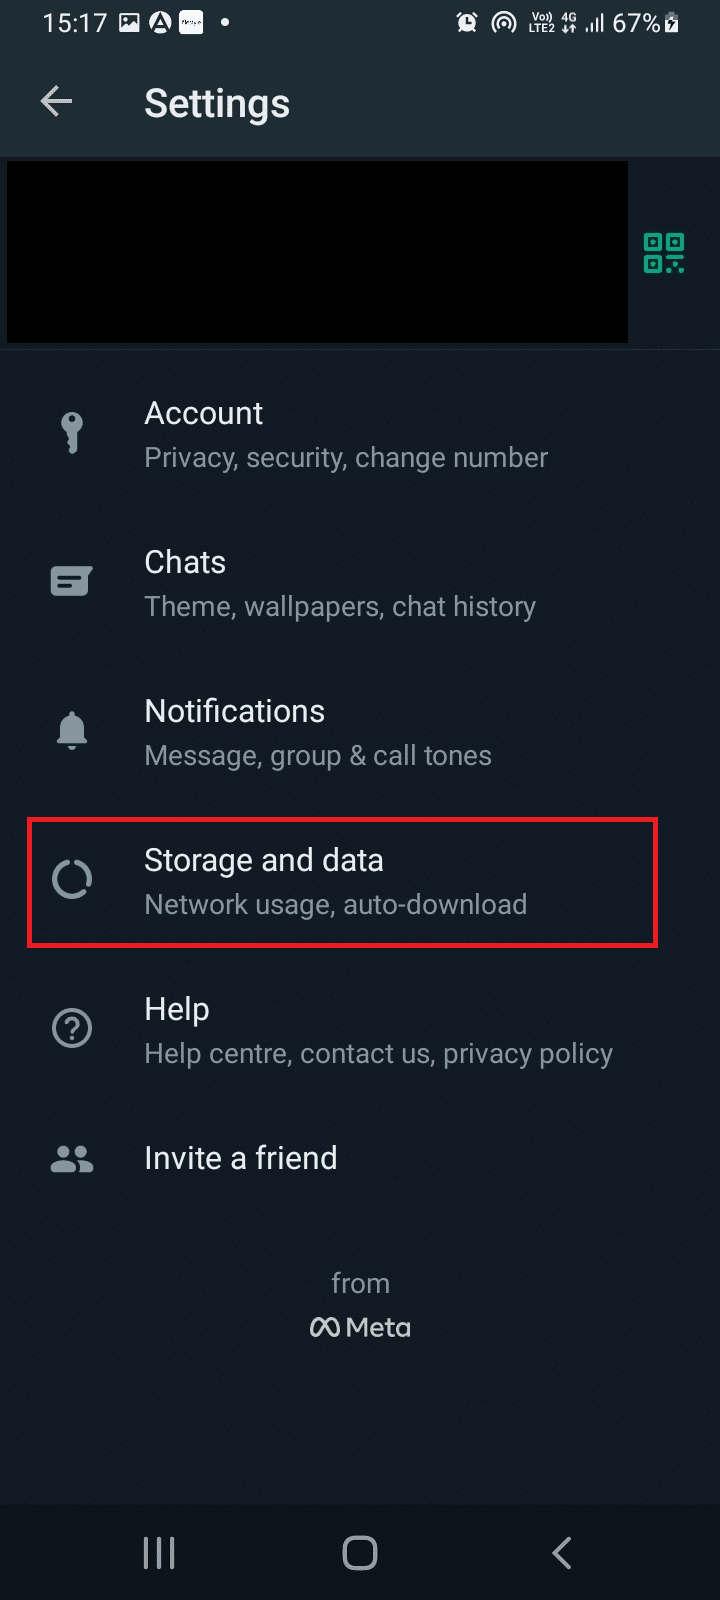 Tap Storage and data